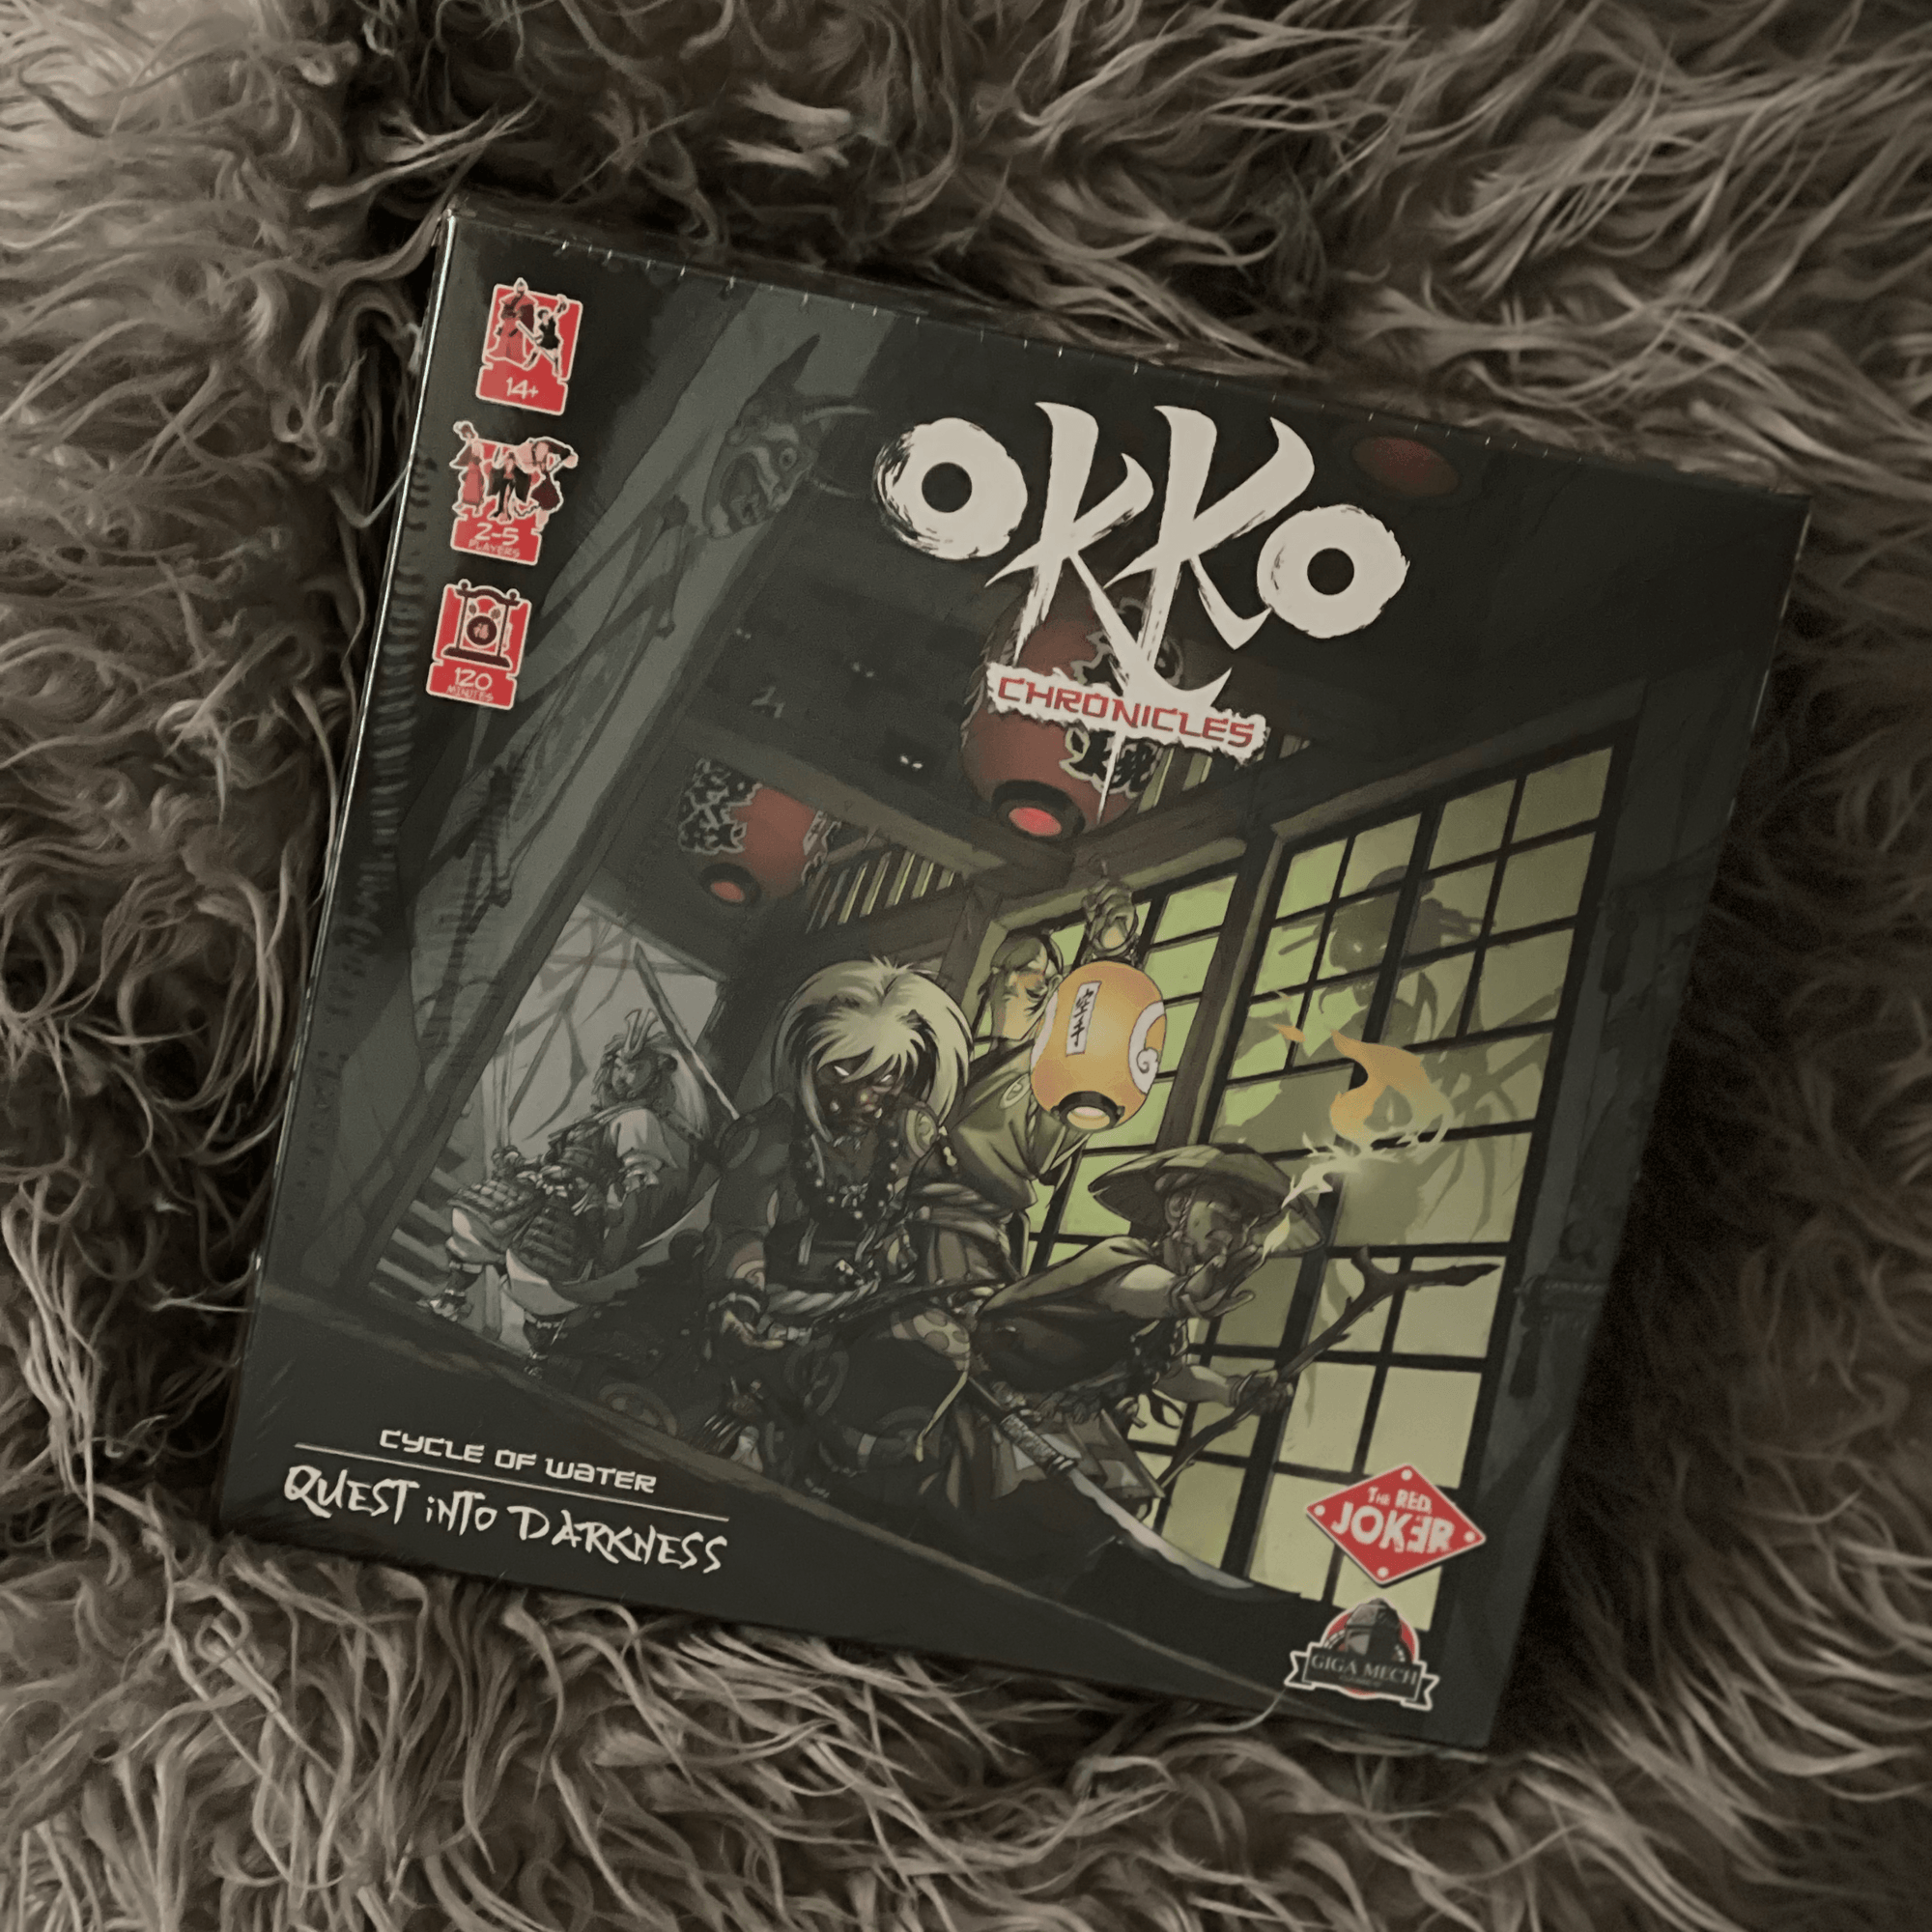 Okko Chronicles: Cycle of Water – Quest into Darkness - Oddball Games